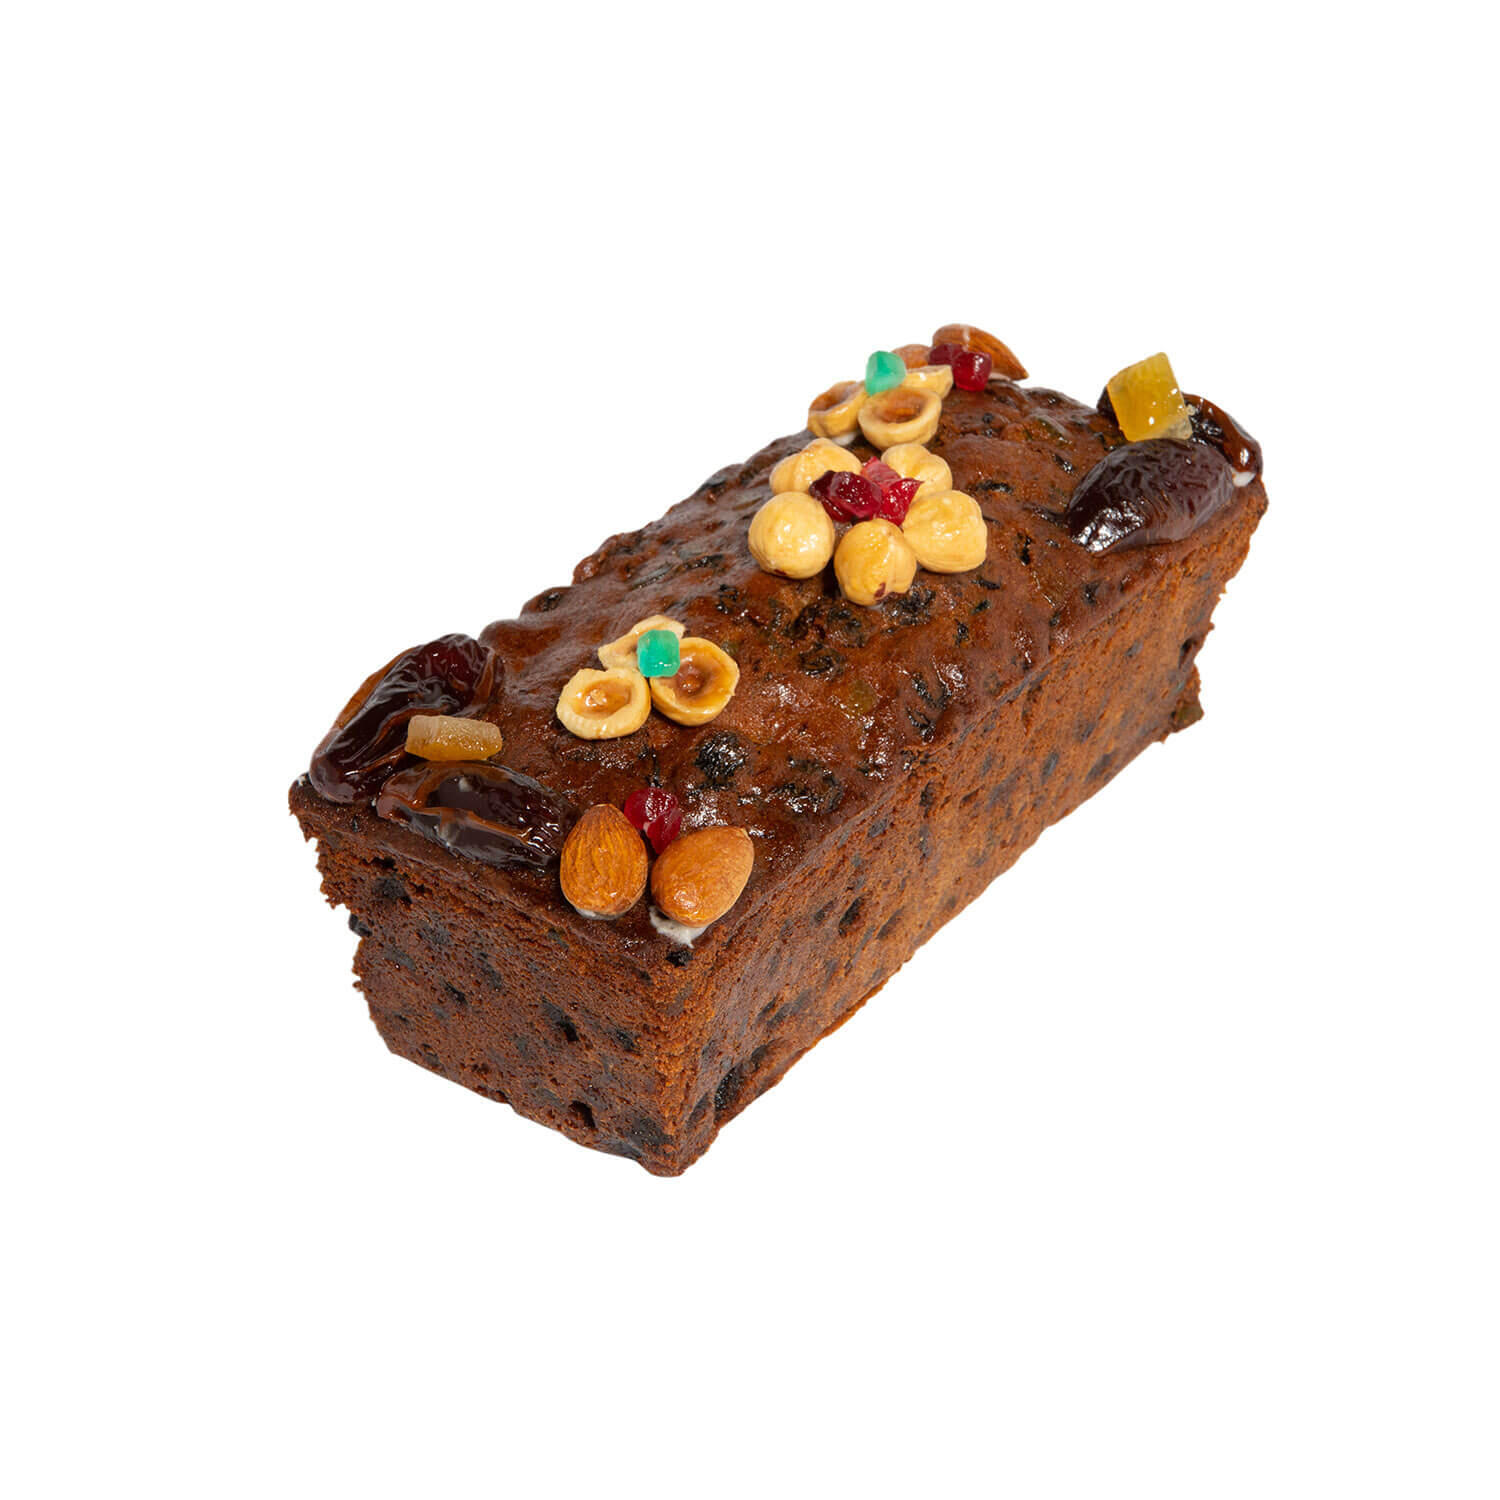 Rich Christmas Fruit Cake Rectangle - Our cakes and pastries